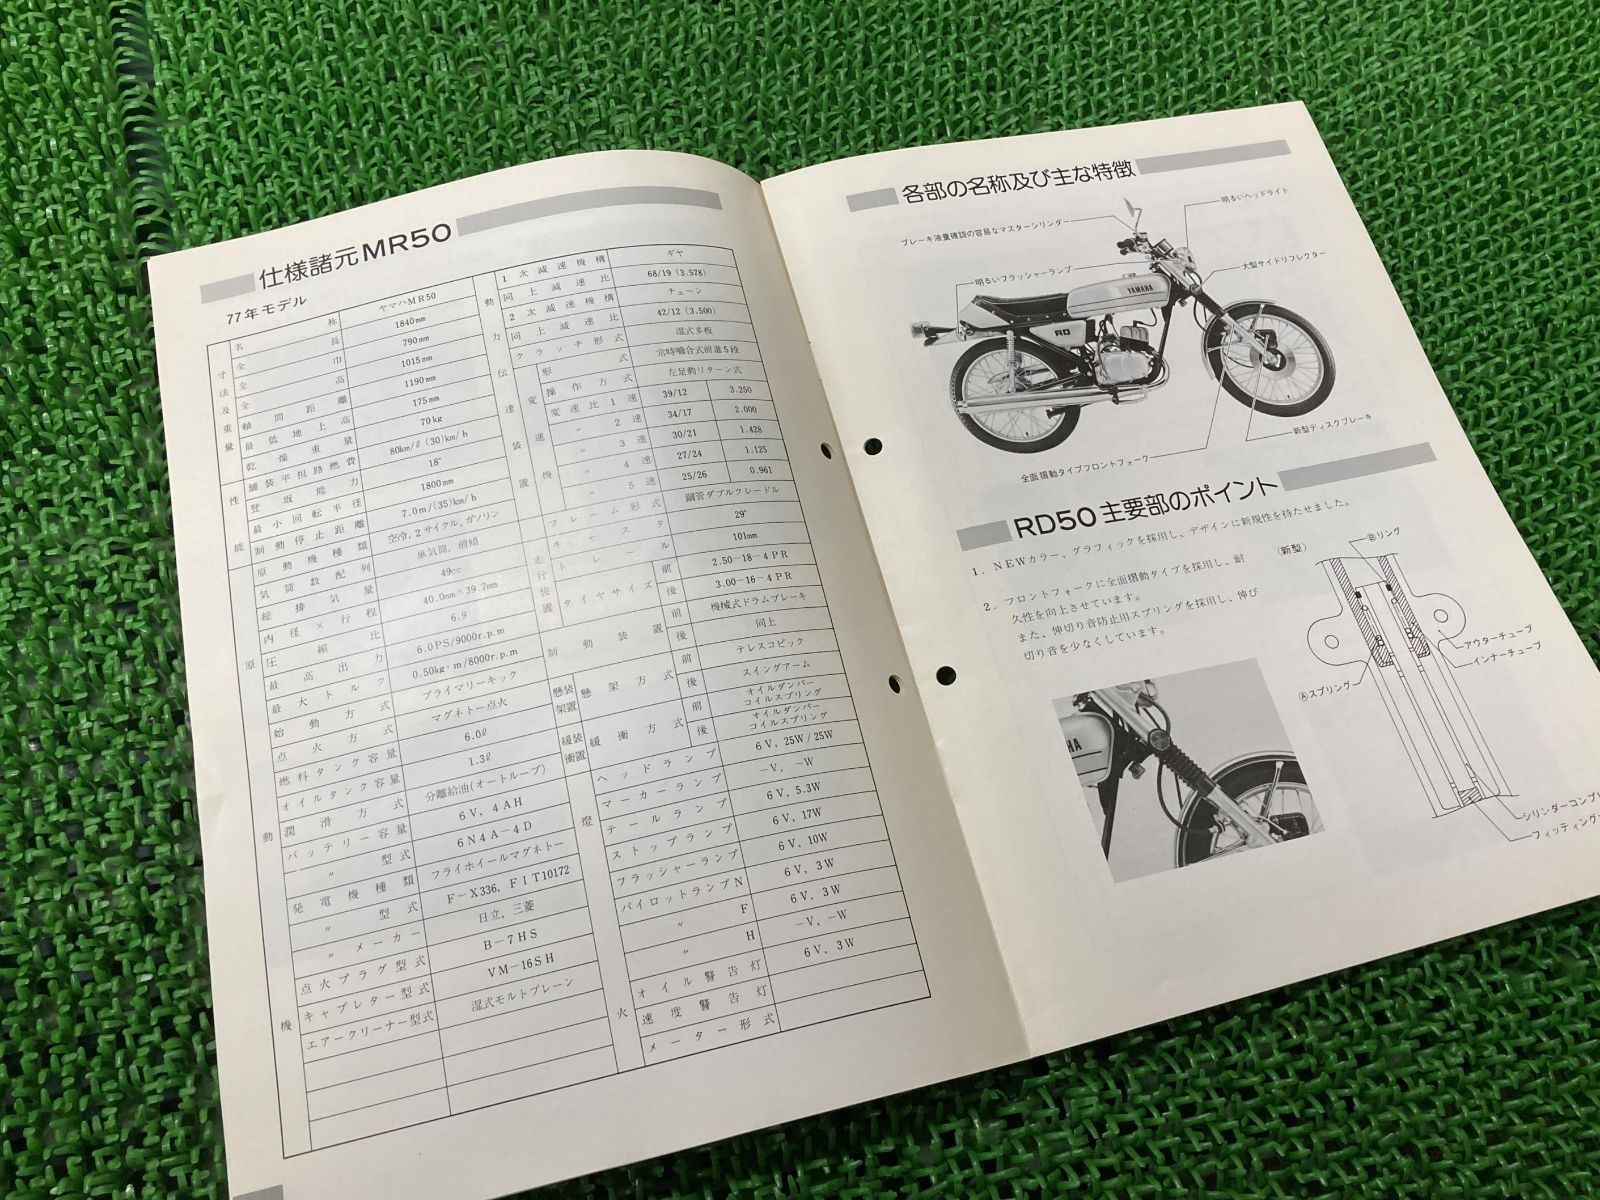 TZR250RSP サービスマニュアル 補足版 ヤマハ 正規  バイク 整備書 91年 レースキットマニュアル 車検 整備情報:22168713